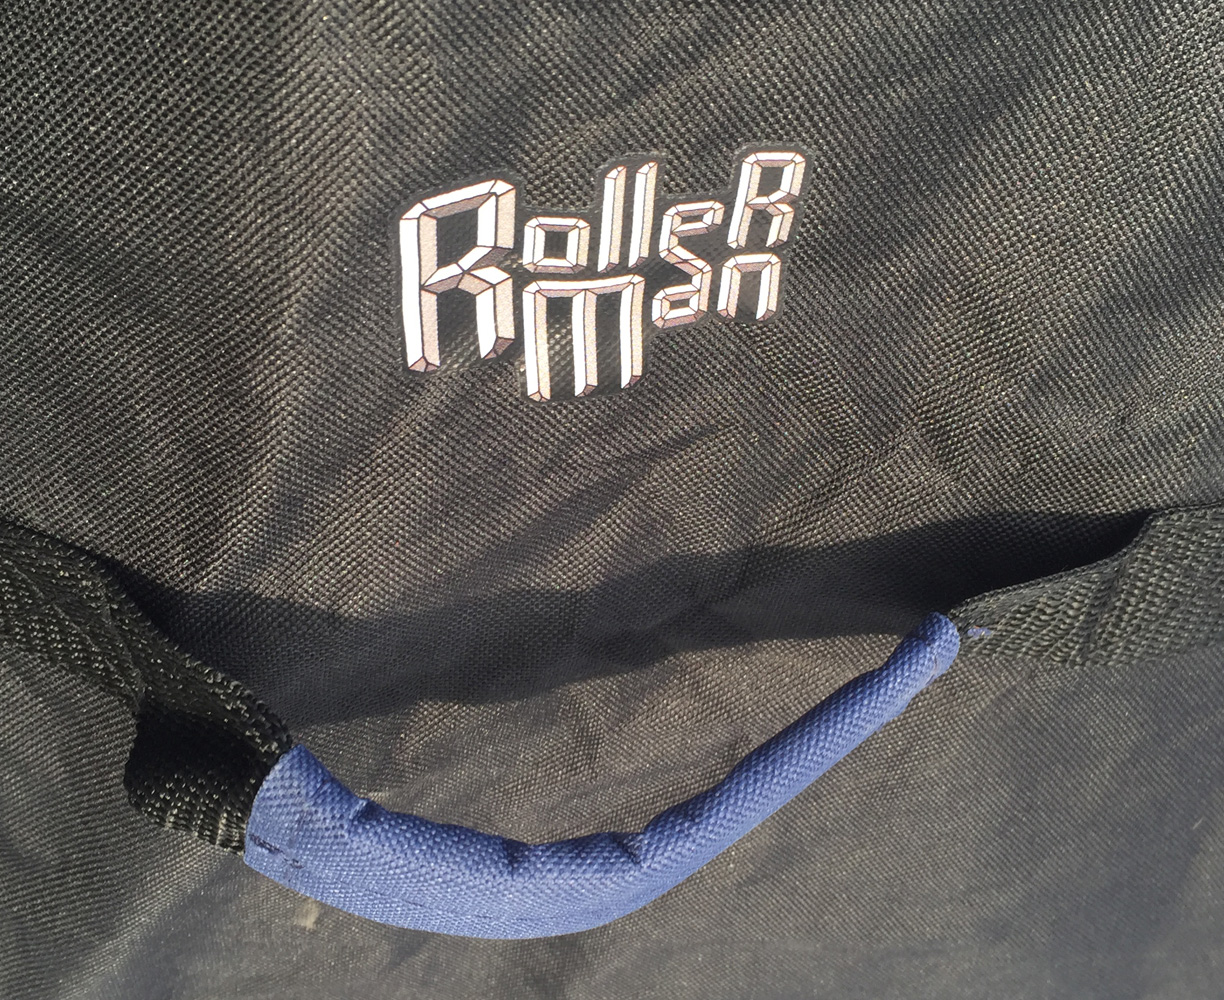 detail of the rollerman logo near the handle of big blue bag designed by Jean Yves Blondeau